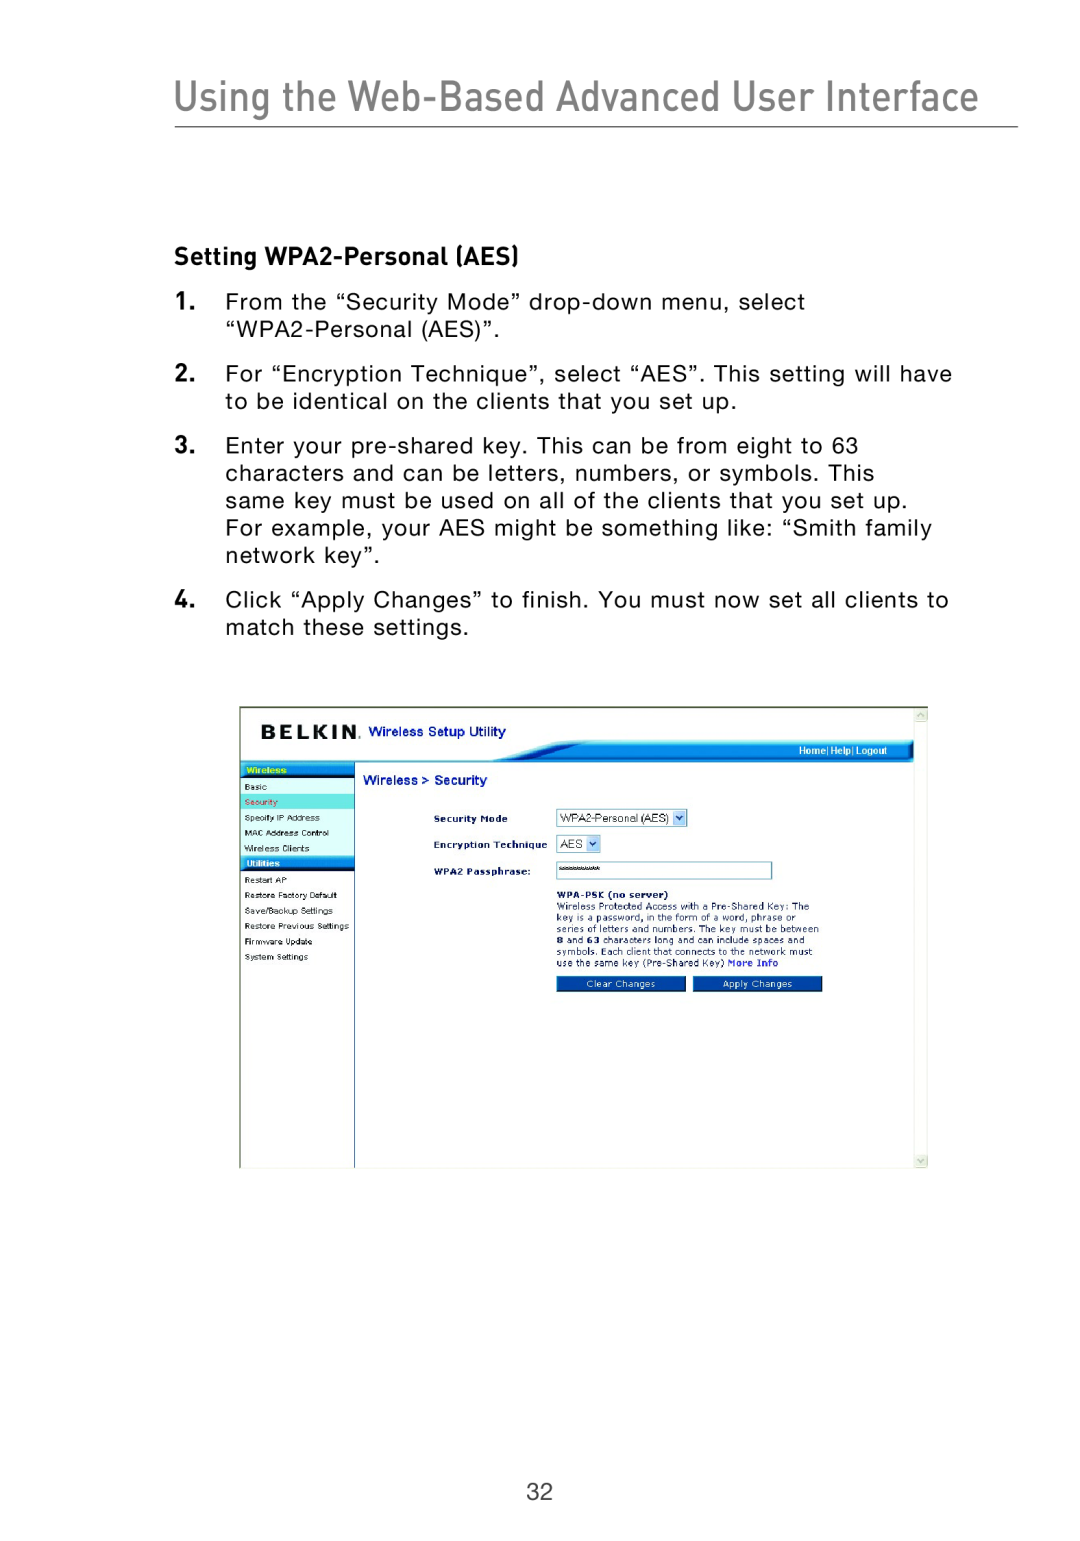 Belkin Range Extender/ Access Point manual Setting WPA2-Personal AES, Using the Web-Based Advanced User Interface 